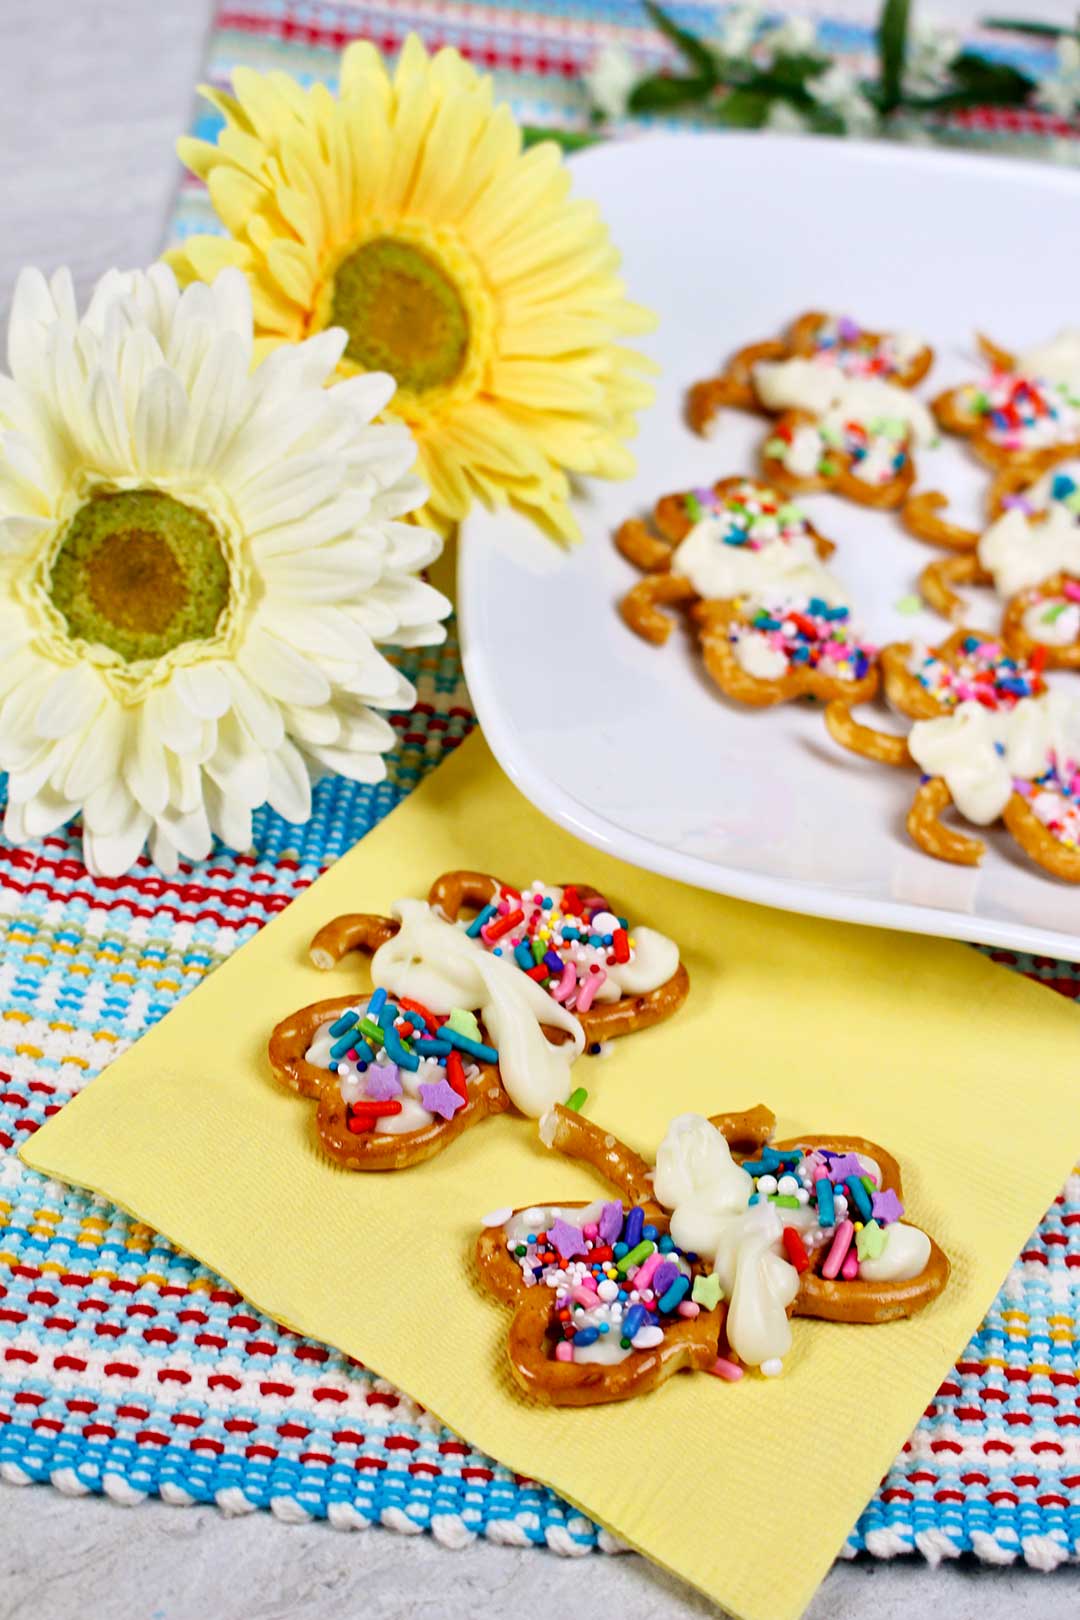 Decorated Butterfly Pretzel Cookies displayed on a yellow napkin near yellow flowers.